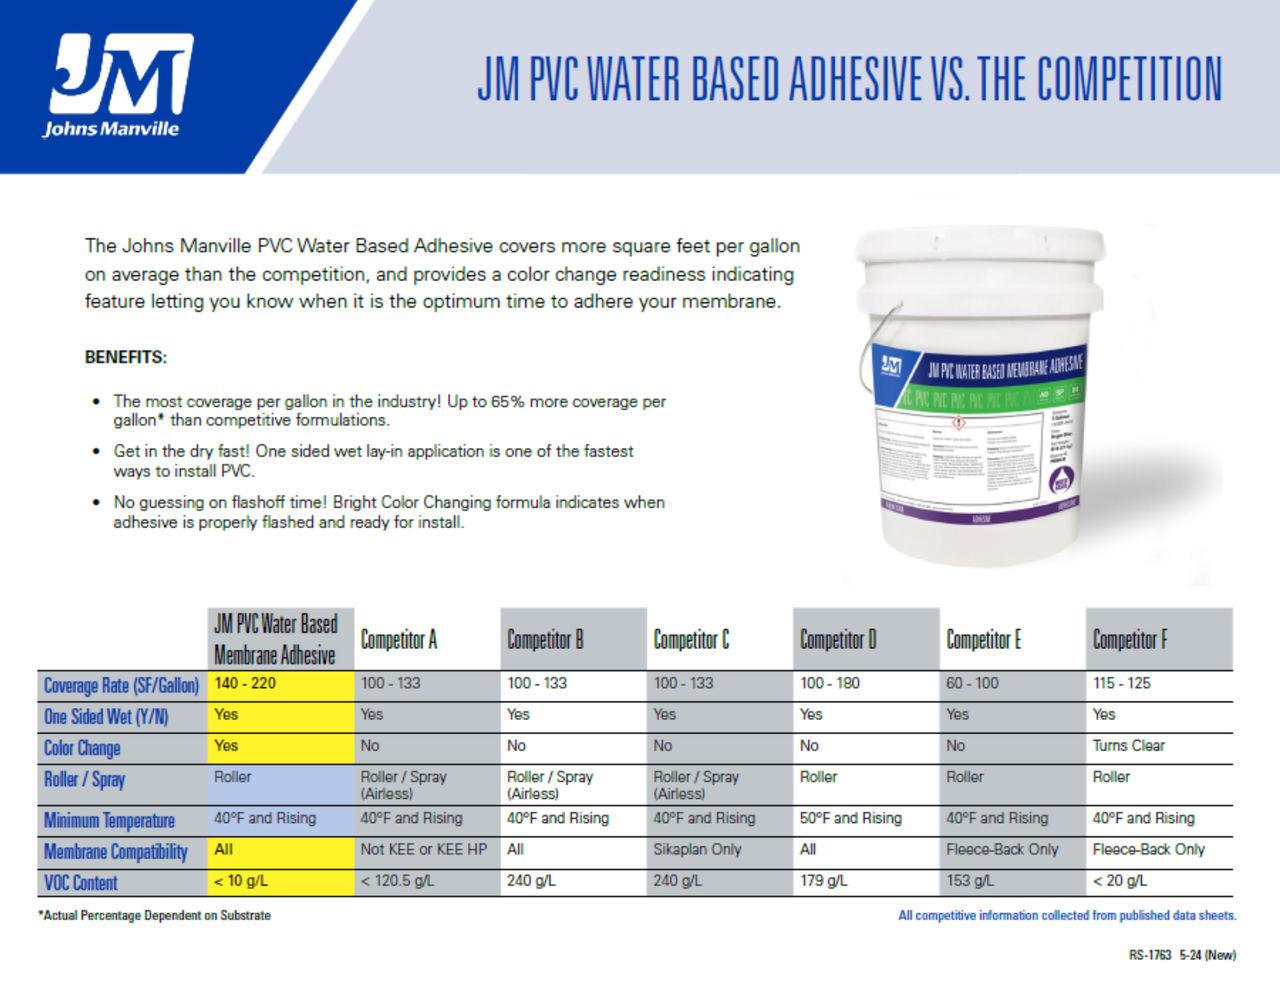 JM PVC Water Based Adhesive vs the Competition